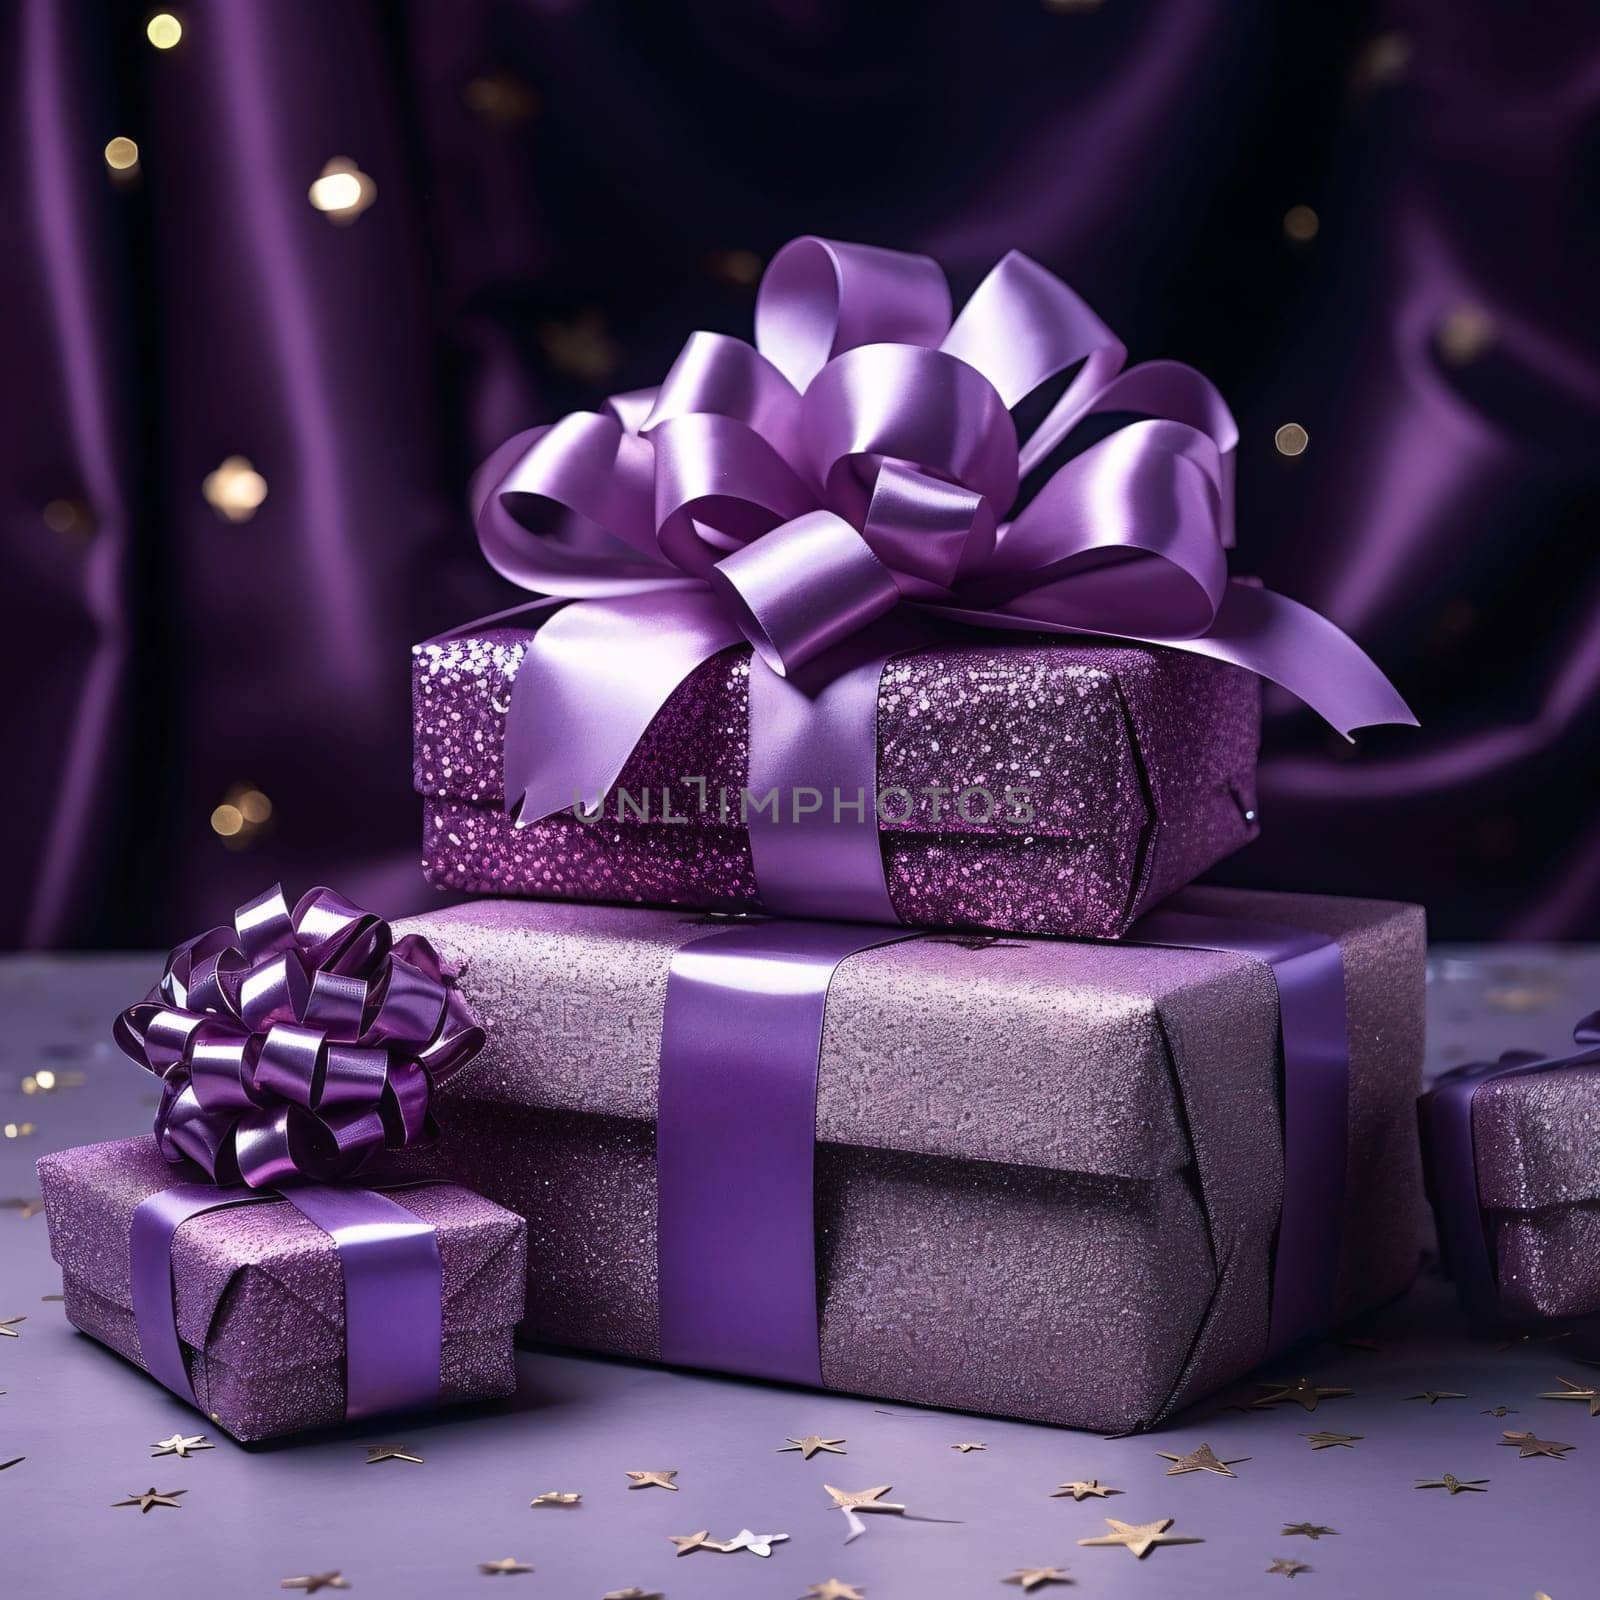 Purple boxes, gifts with bows on purple dark background. Gifts as a day symbol of present and love. A time of falling in love and love.